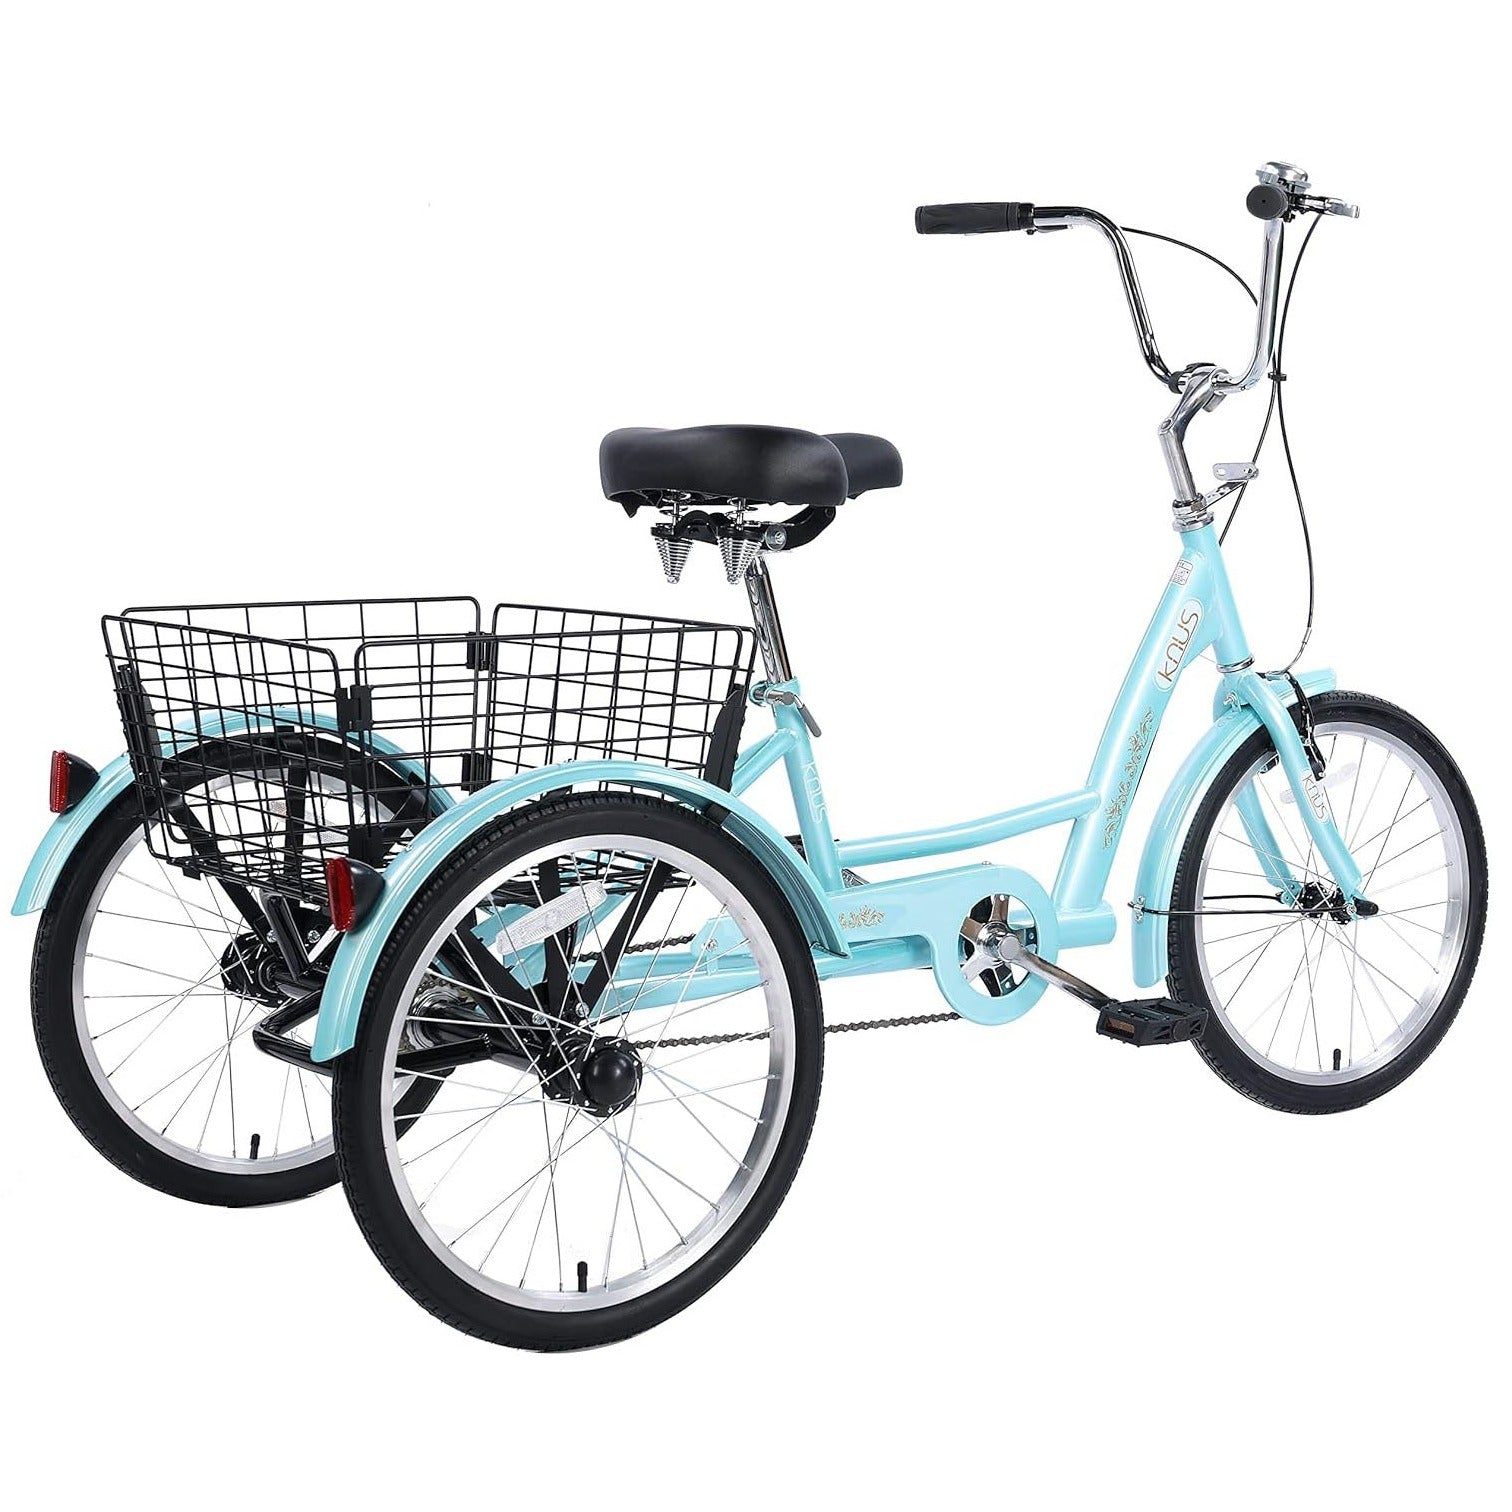 Adult Tricycle | Commuting Bicycle For Old People - Hycline